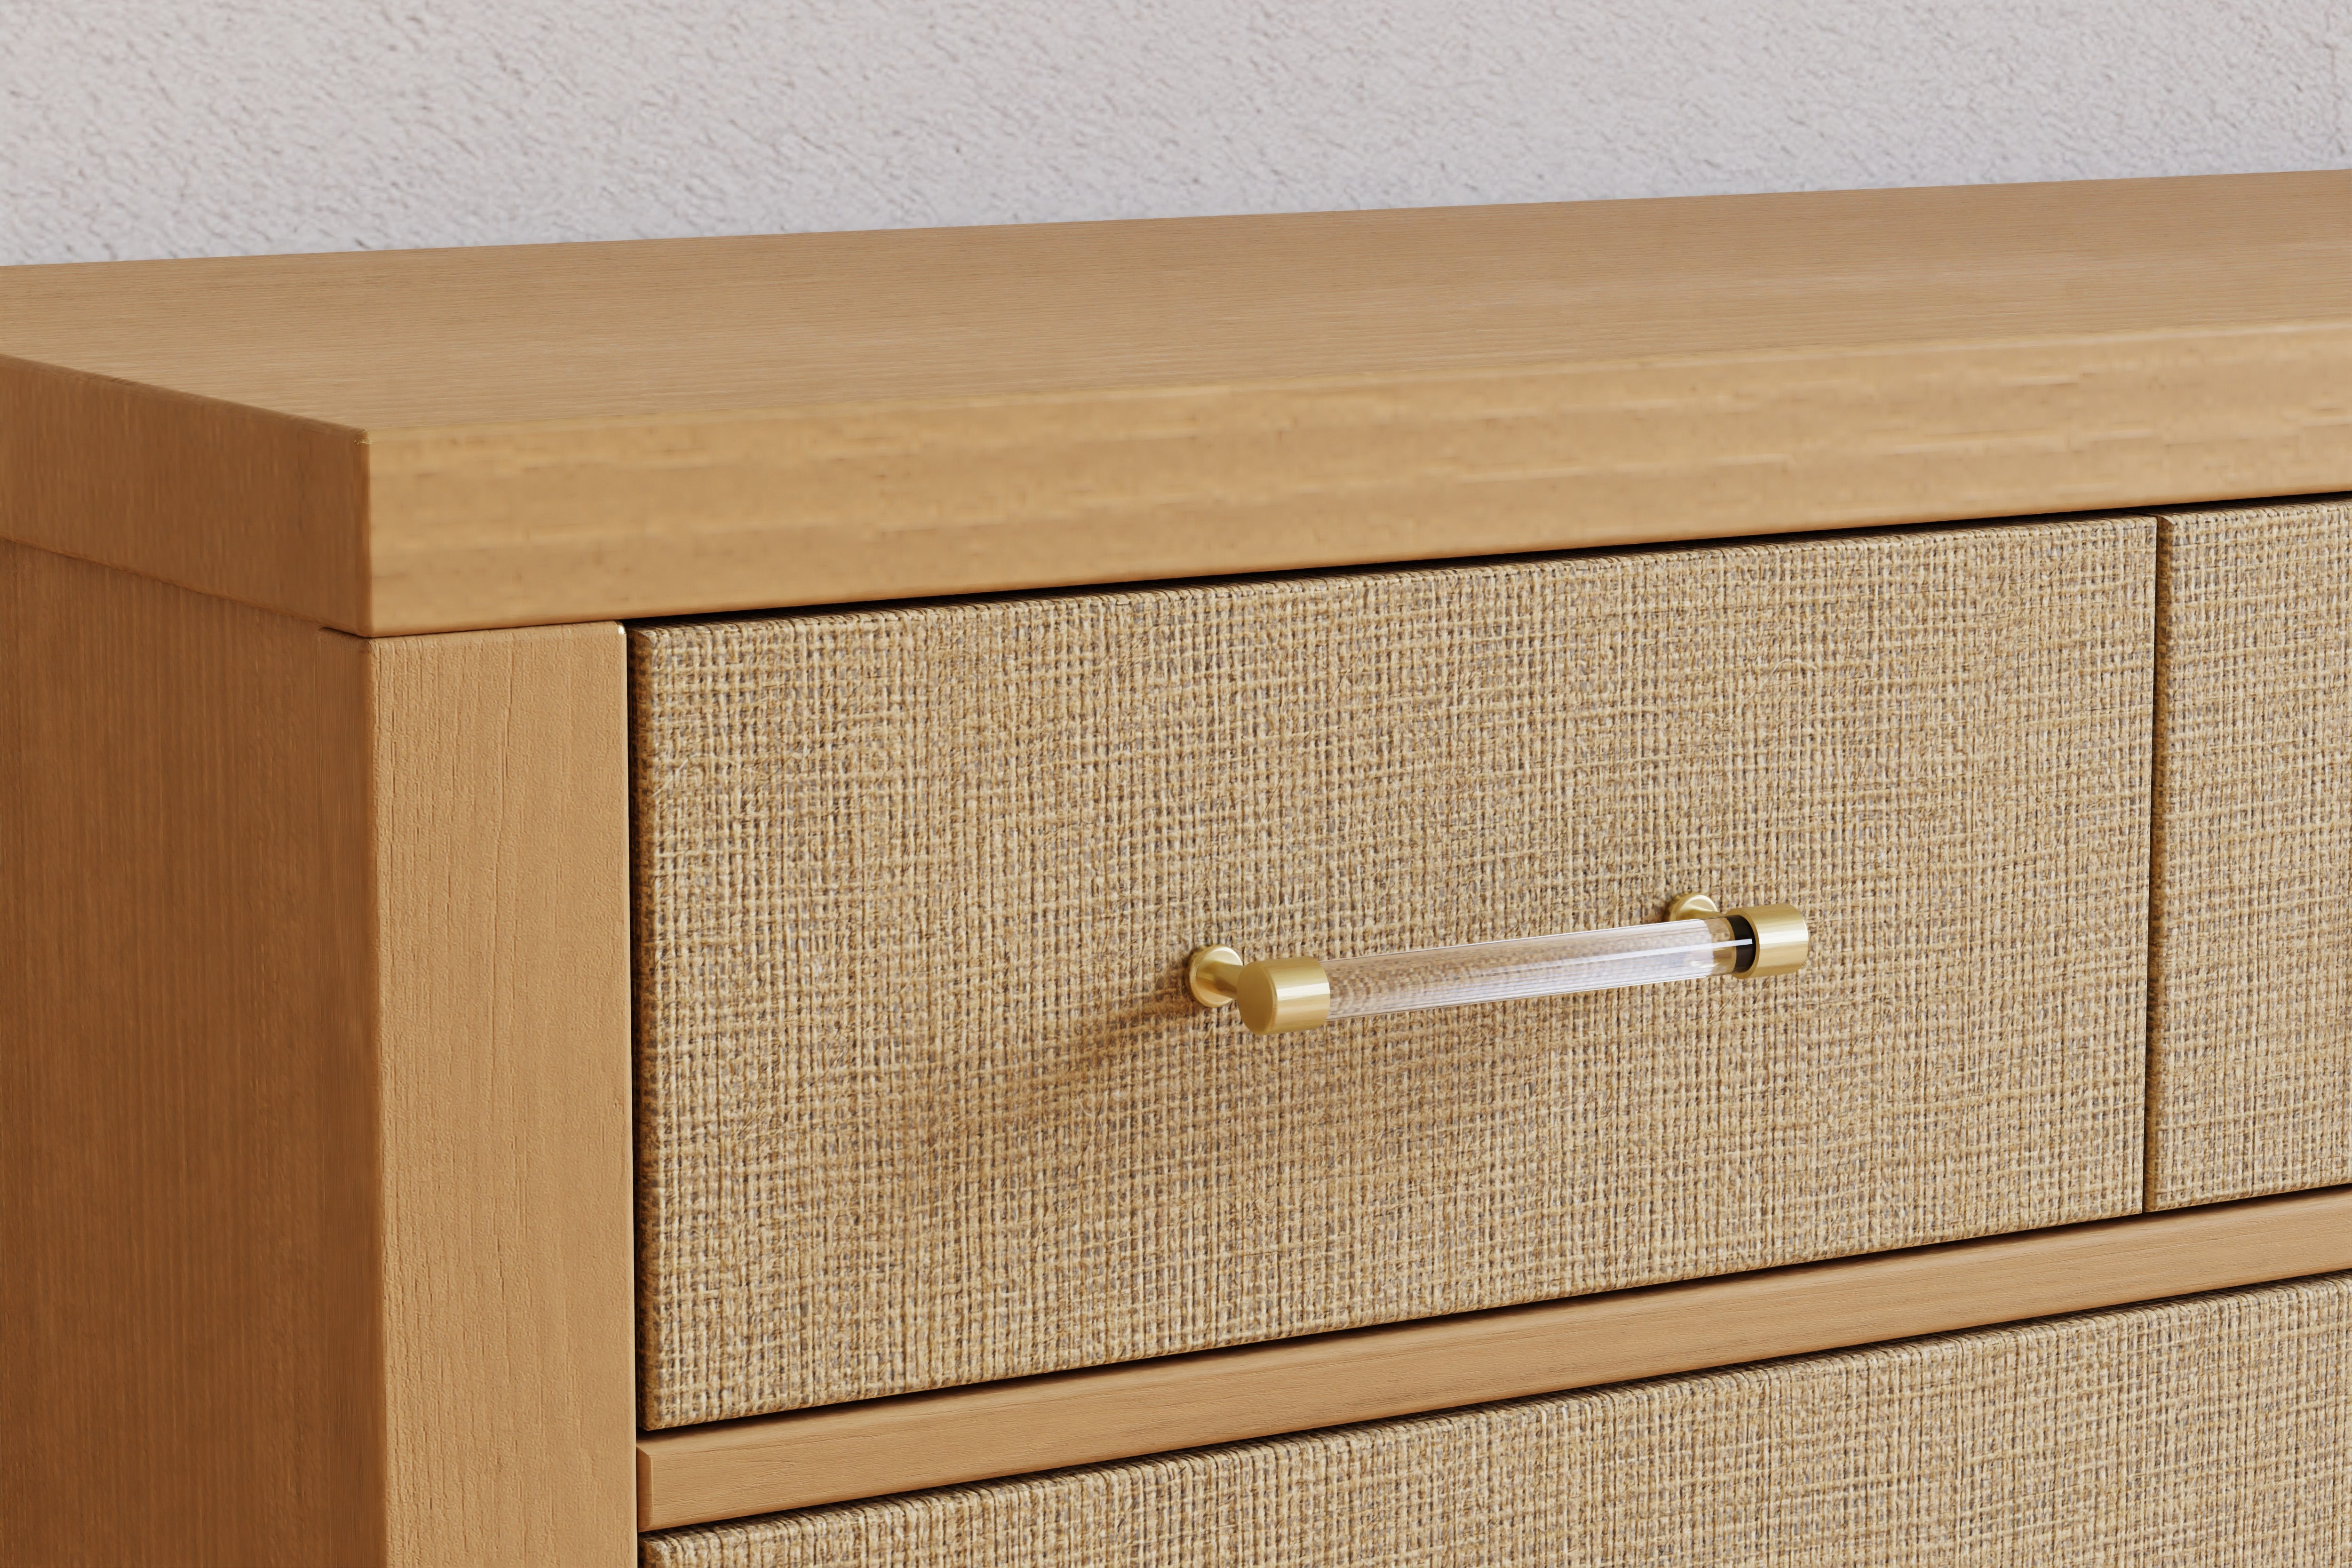 Eloise 7-Drawer Assembled Dresser - Honey and Performance Sand Eco-Weave - Twinkle Twinkle Little One